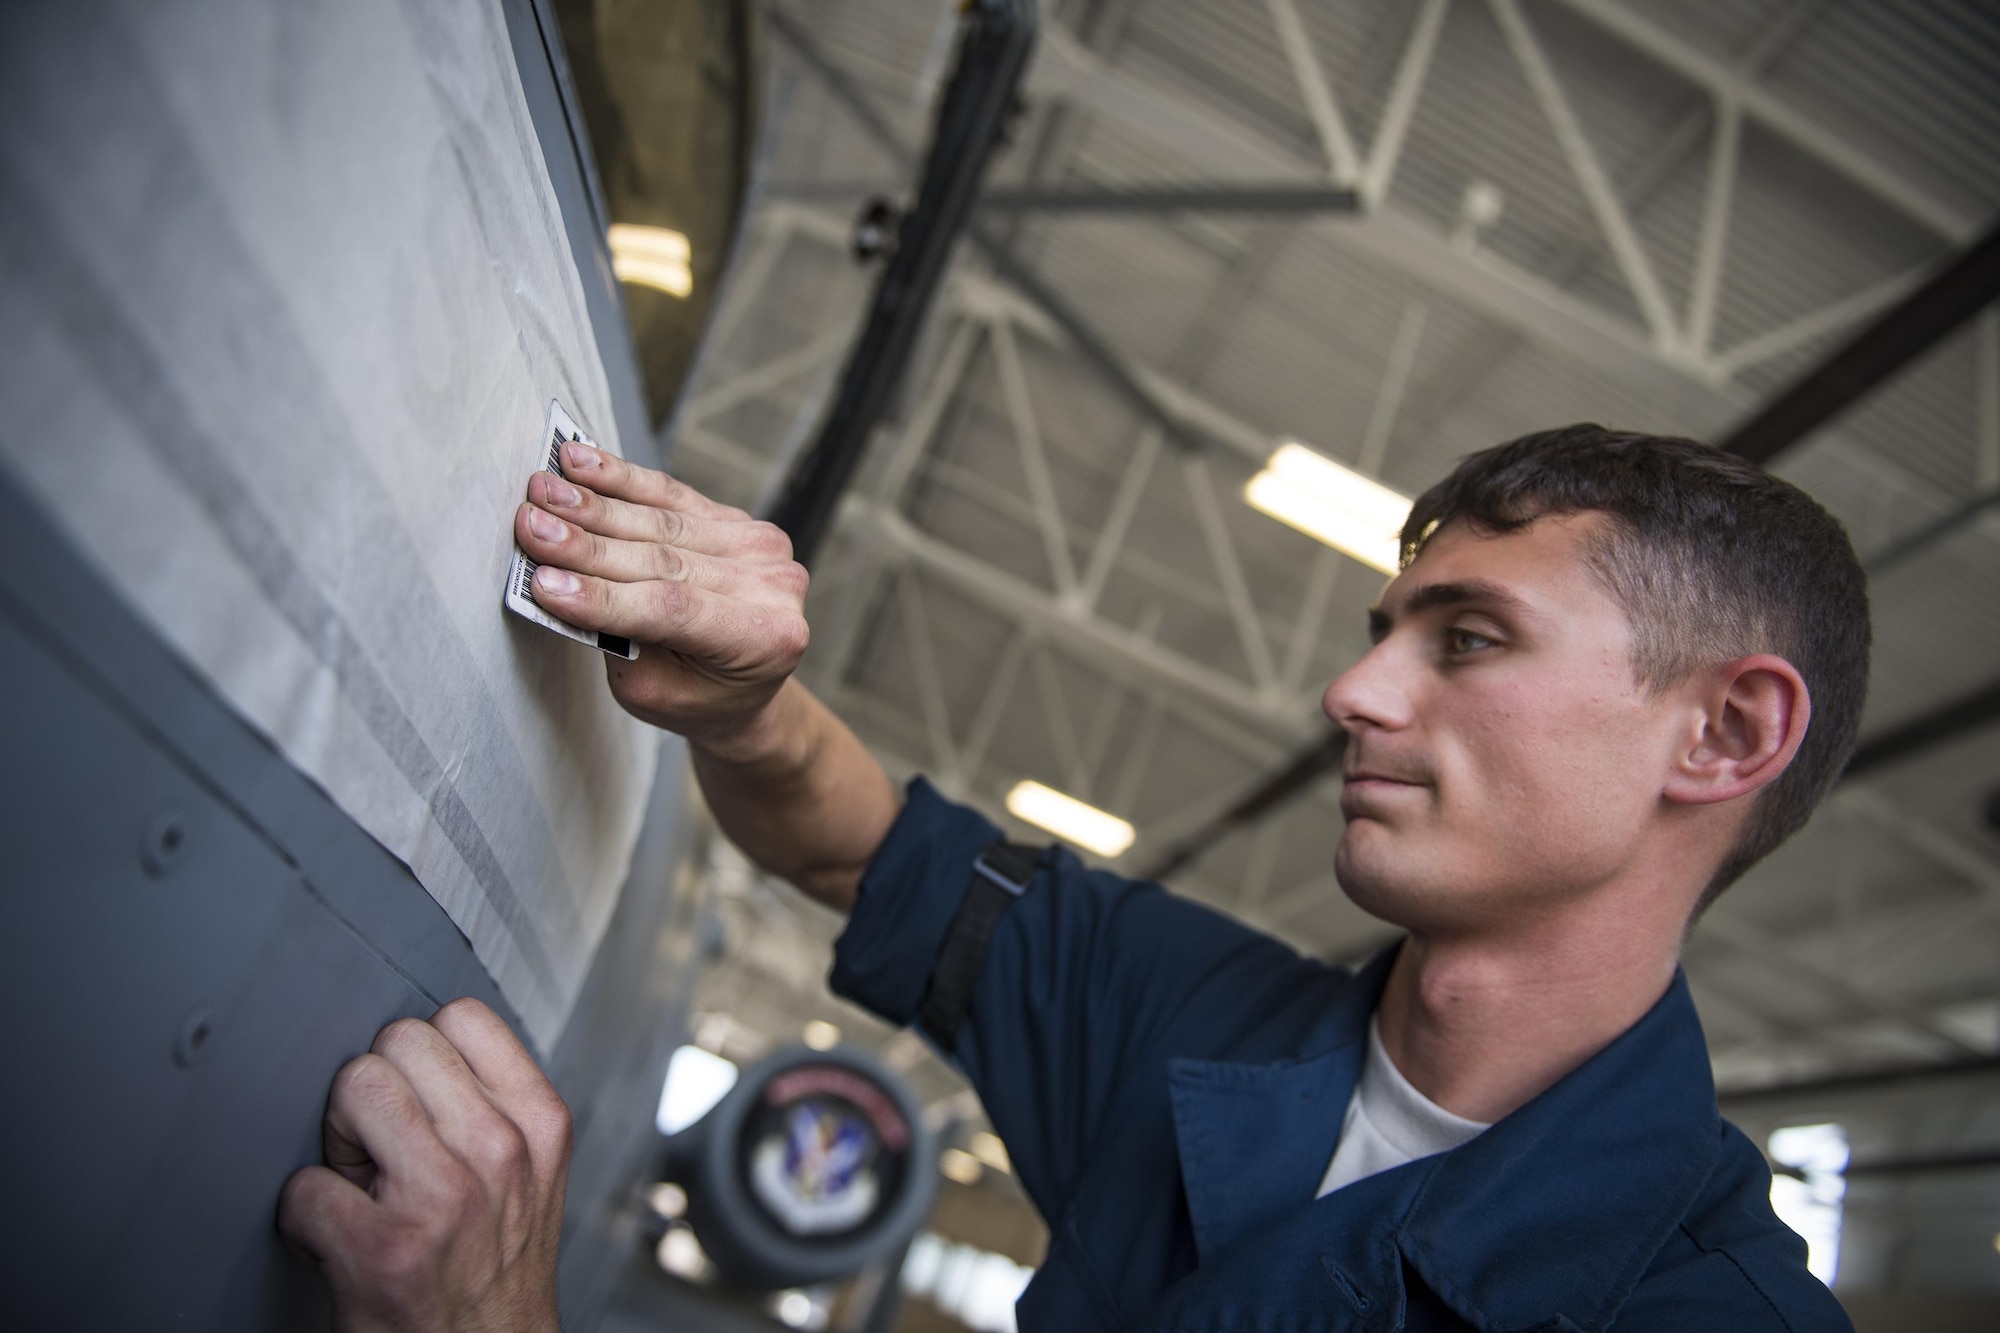 Senior Airman Michael Verheyden,74th Aircraft Maintenance Unit dedicated crew chief, applies a nametape to assign the A-10C Thunderbolt II in the Weapons Load Training hangar to the late Staff Sgt. Sara Toy, 74th AMU weapons team chief, Feb. 27, 2017, at Moody Air Force Base, Ga. Team Moody’s weapons community wanted to honor Toy, who died in a motor vehicle accident on Feb. 25, 2017, by dedicating the aircraft used for training and certifying all weapons load crew members. (U.S. Air Force photo by Andrea Jenkins/Released)